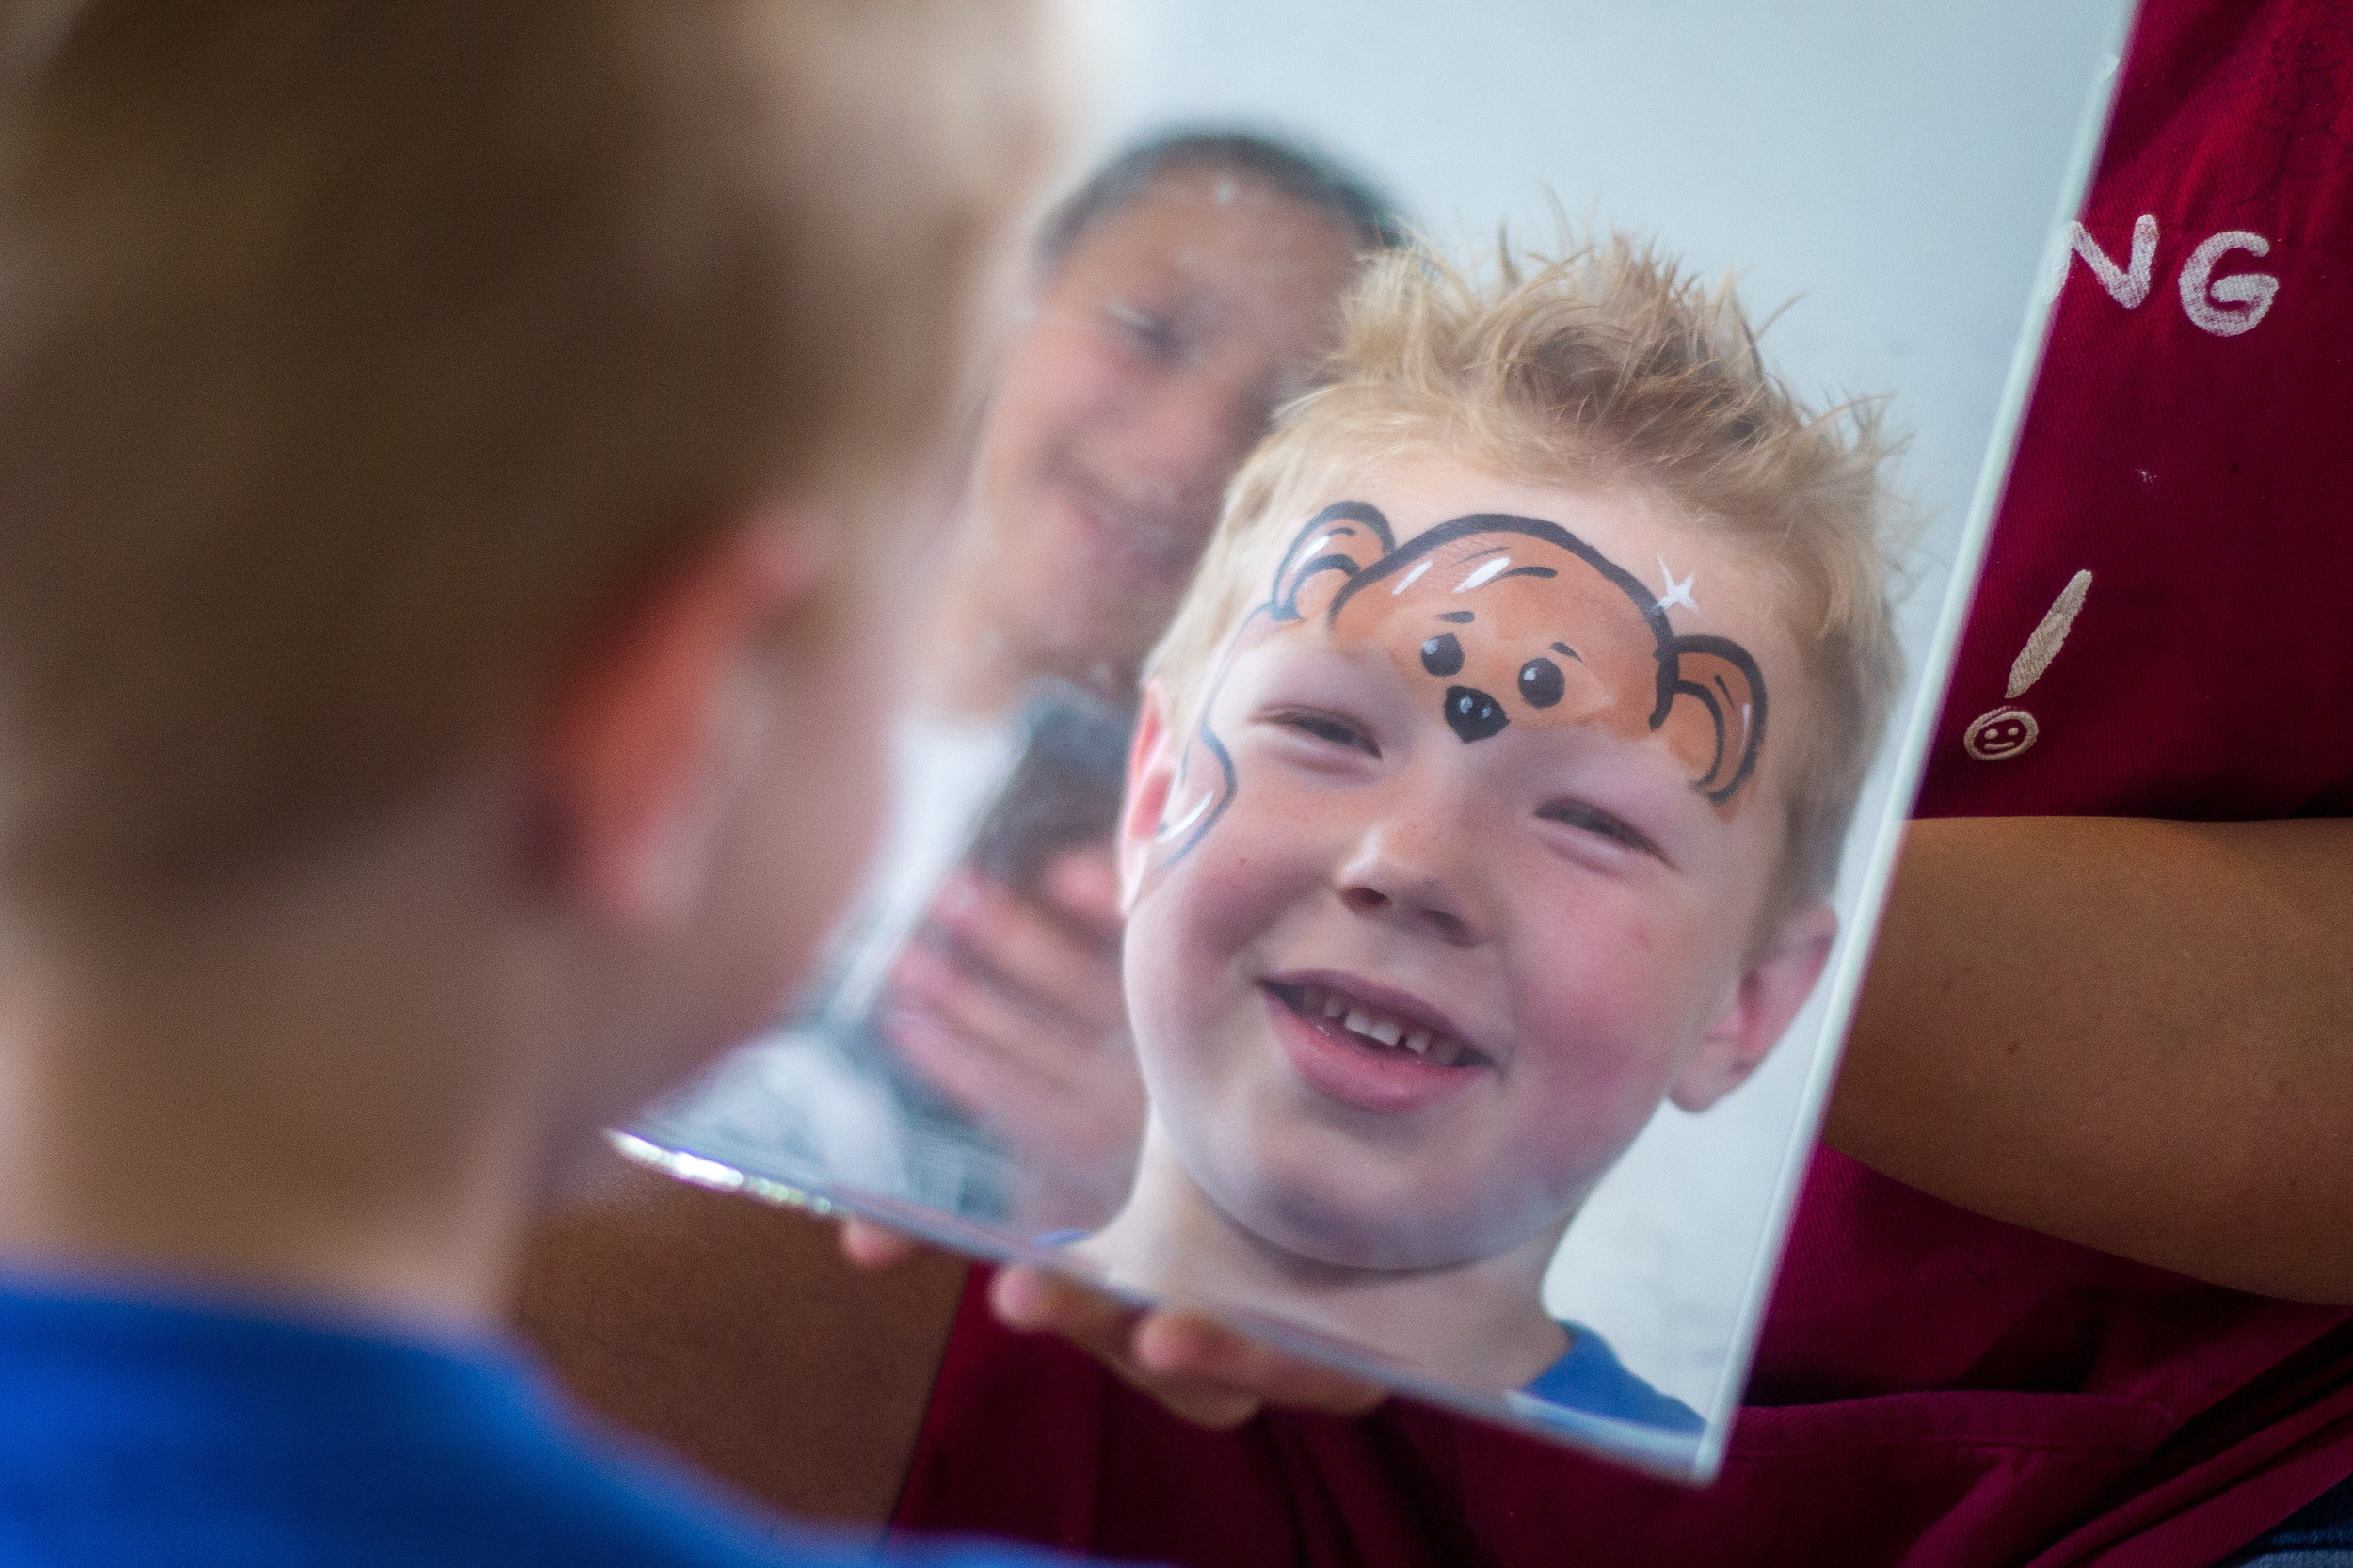  Jesse Shaffer, 7, of Darlington, smiles as he sees his face painted like a monkey by Teressa Hajtol at the Beaver County Bookfest in Beaver on Saturday afternoon. The Bookfest featured over 50 authors, a children's tent, food vendors and activities.